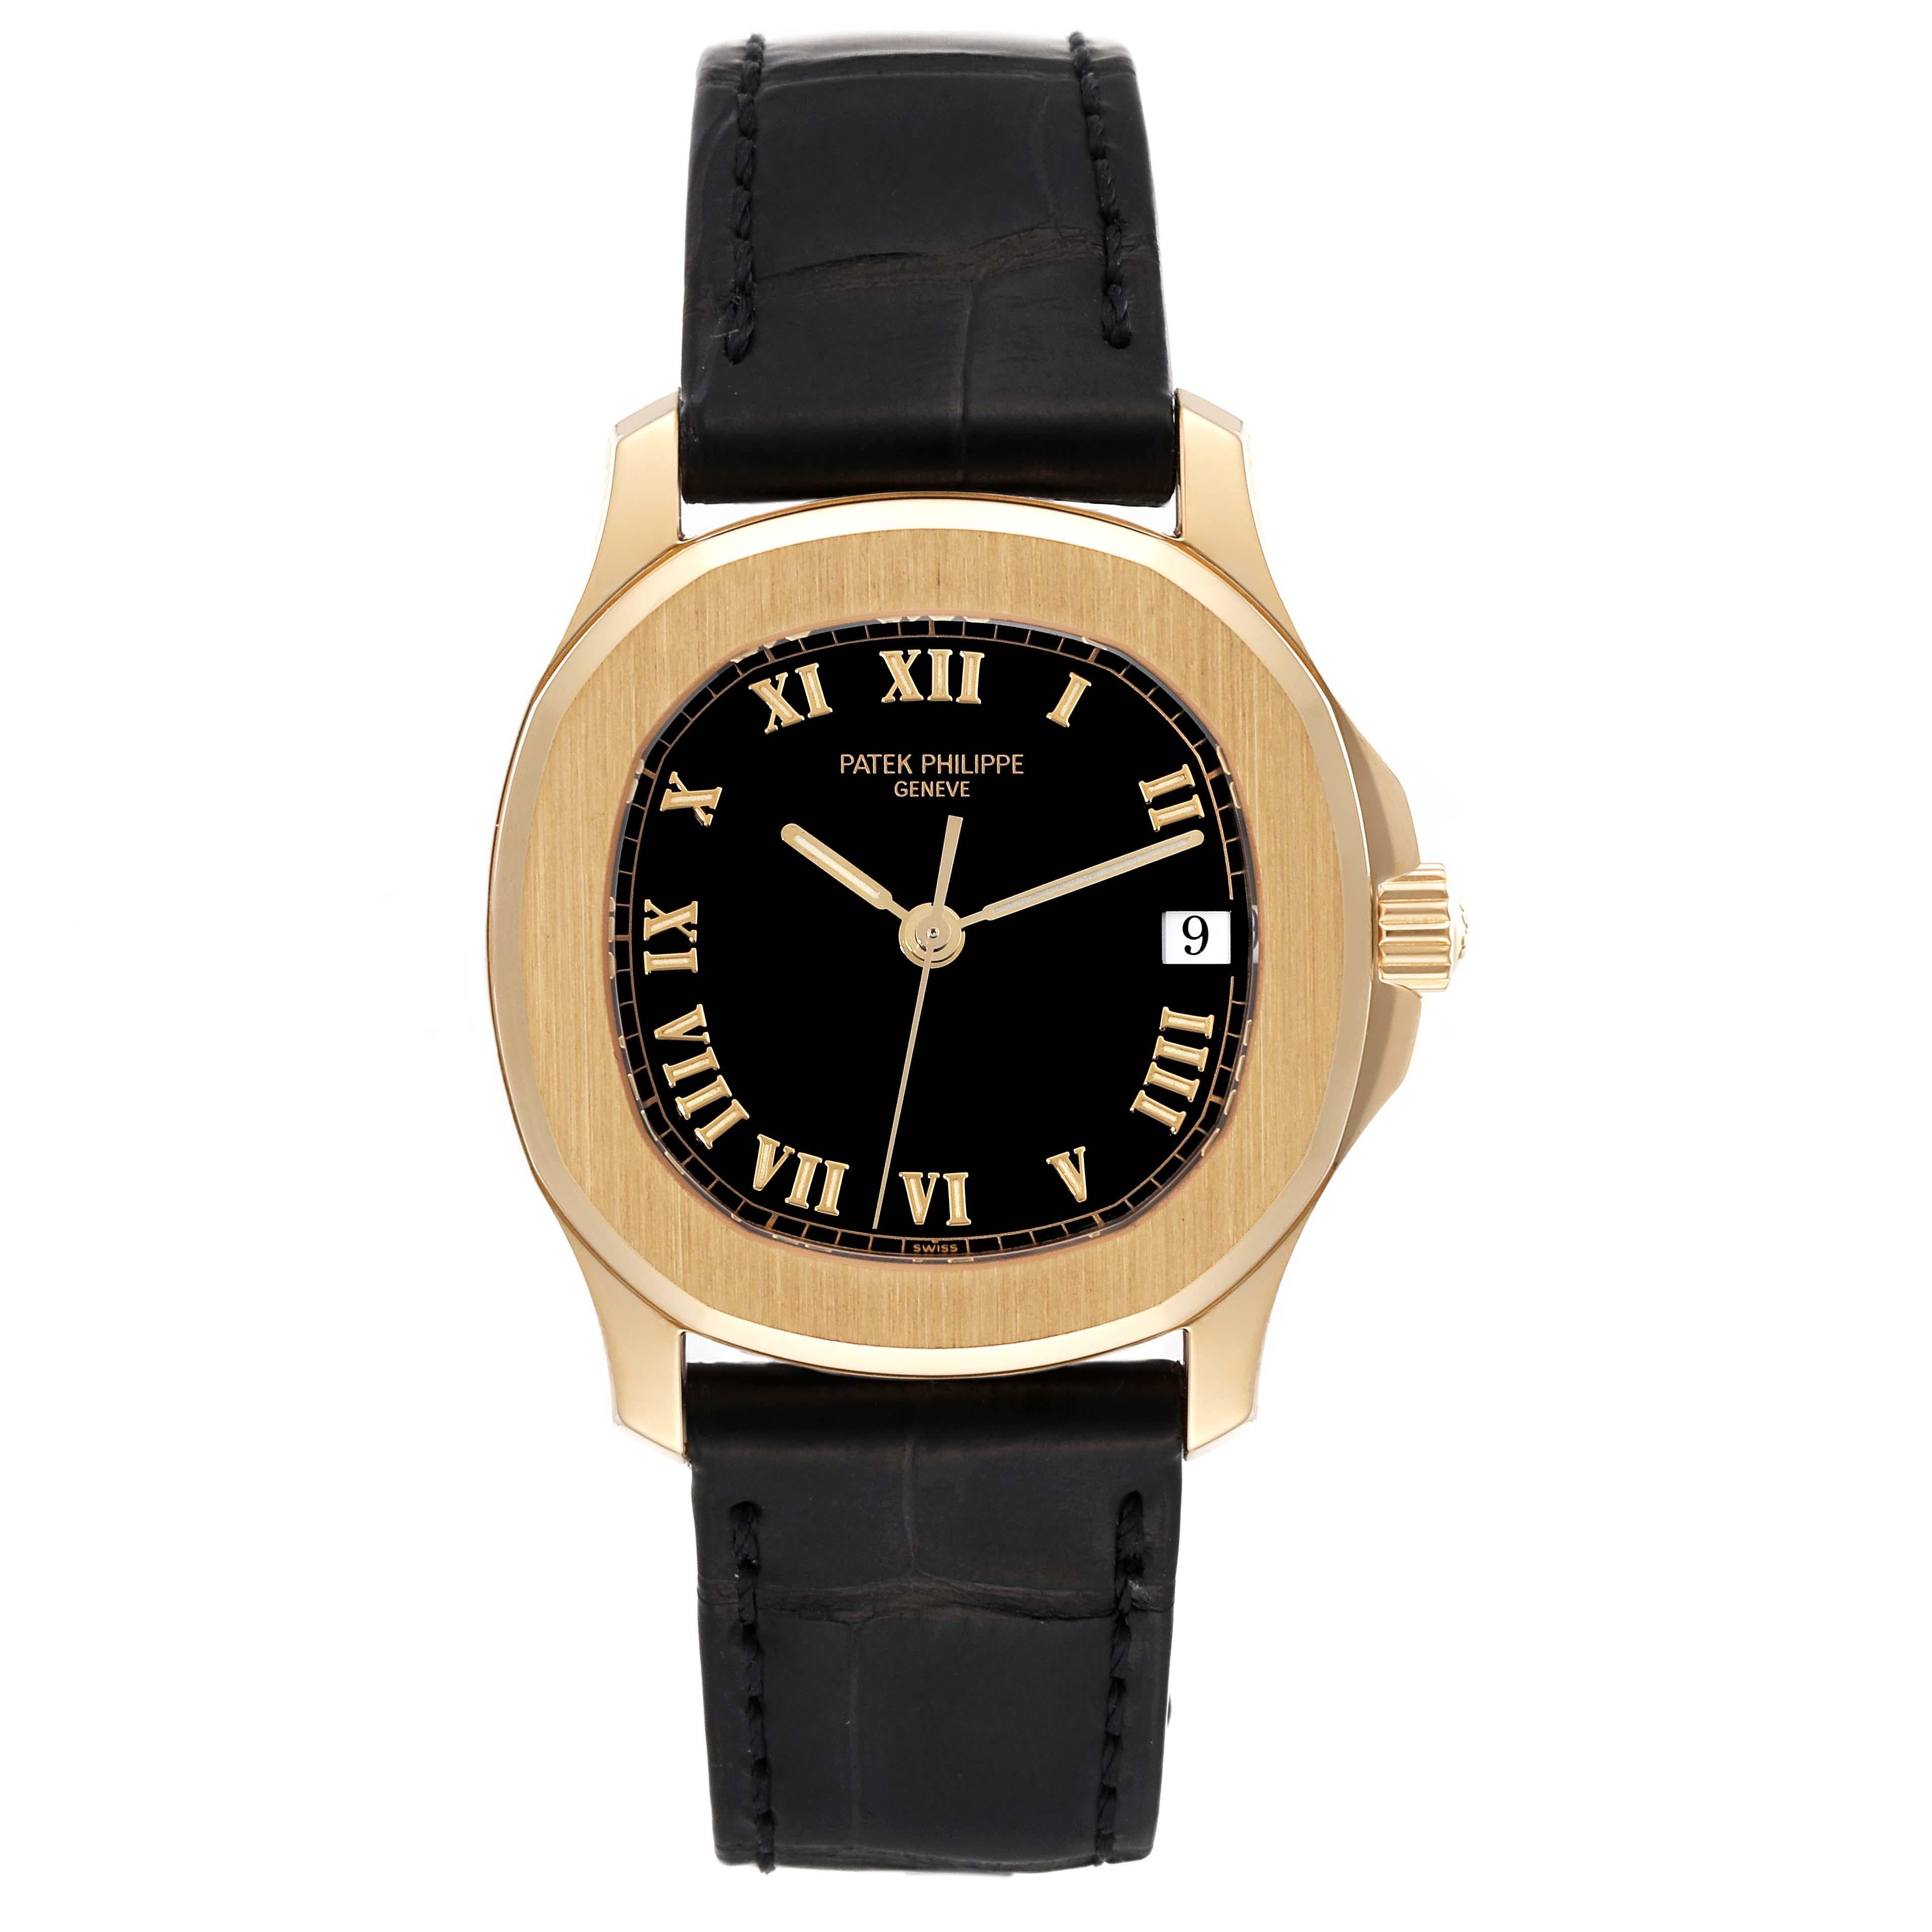 Patek Philippe Aquanaut Yellow Gold Black Dial Mens Watch 5060J. Automatic movement. 18k yellow gold case 36 mm. Patek Philippe cross logo on the crown. . Scratch resistant sapphire crystal. Black dial with raised gold Roman numerals. Luminous hands